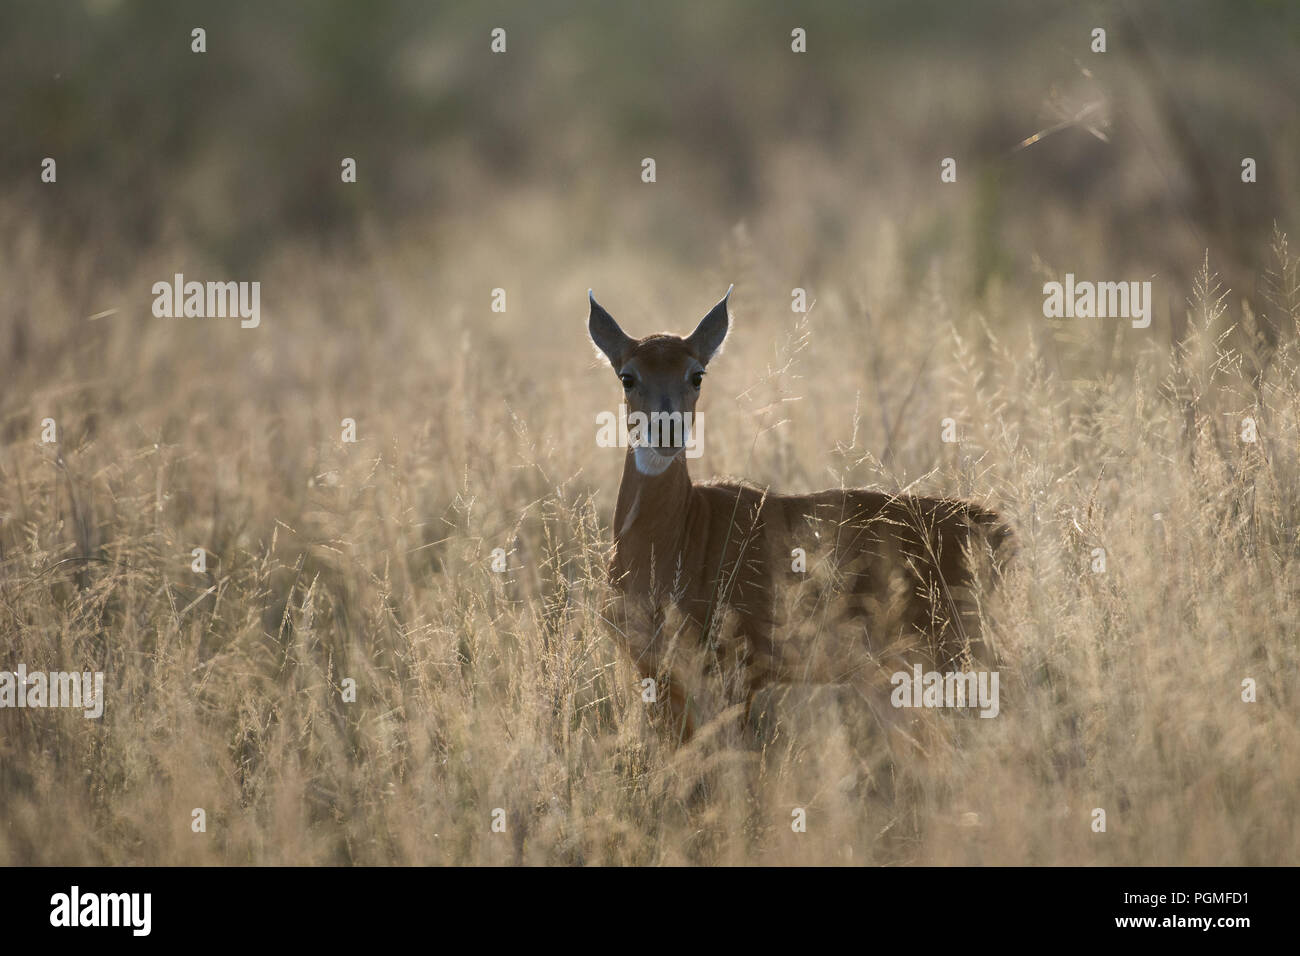 A young Nilgai or Blue Bull (Boselaphus tragocamelus) against the rising sun on a winter morning at Tal Chapar Wildlife Sanctuary, Rajasthan, India Stock Photo